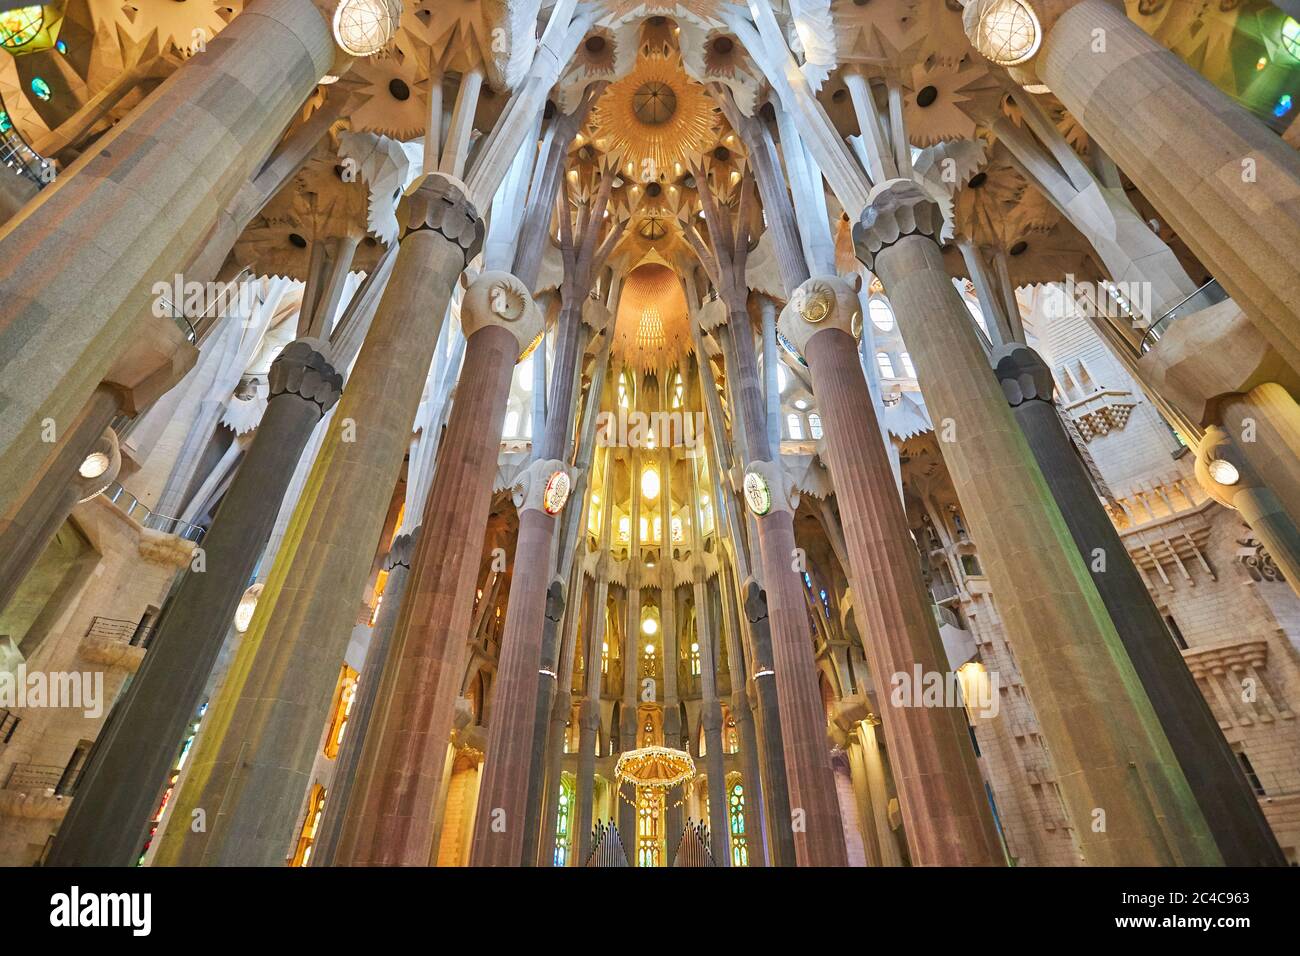 With the extraordinary roof vaulting at Sagrada Familia, Antoni Gaudi created the column supports to represent forests. Stock Photo